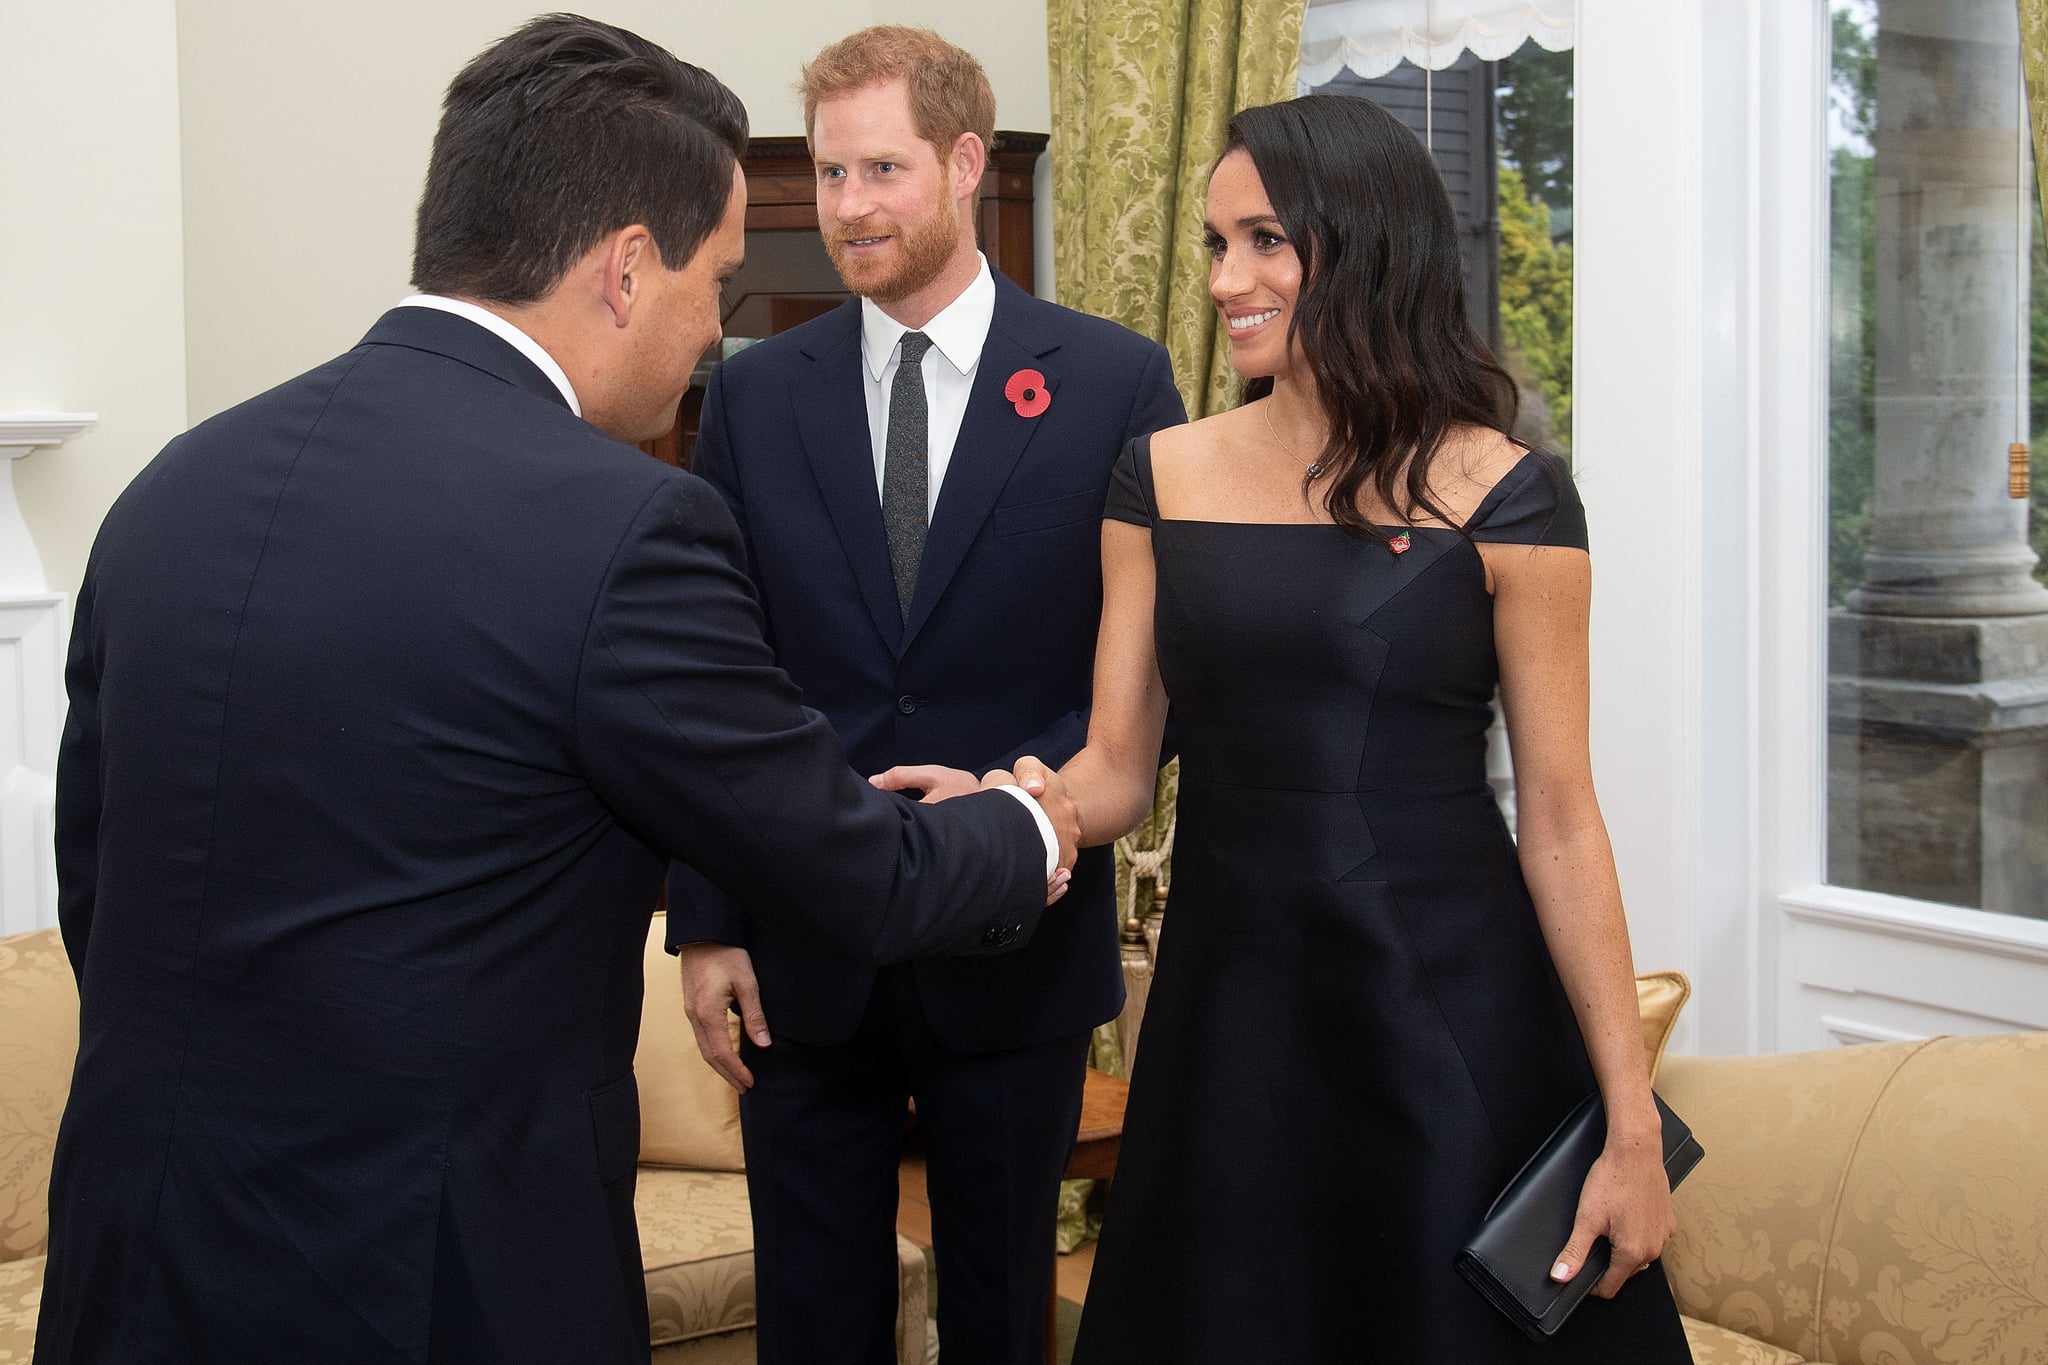 Gabriela Hearst On Dressing Meghan Markle And How To Be More Green-Minded, British Vogue